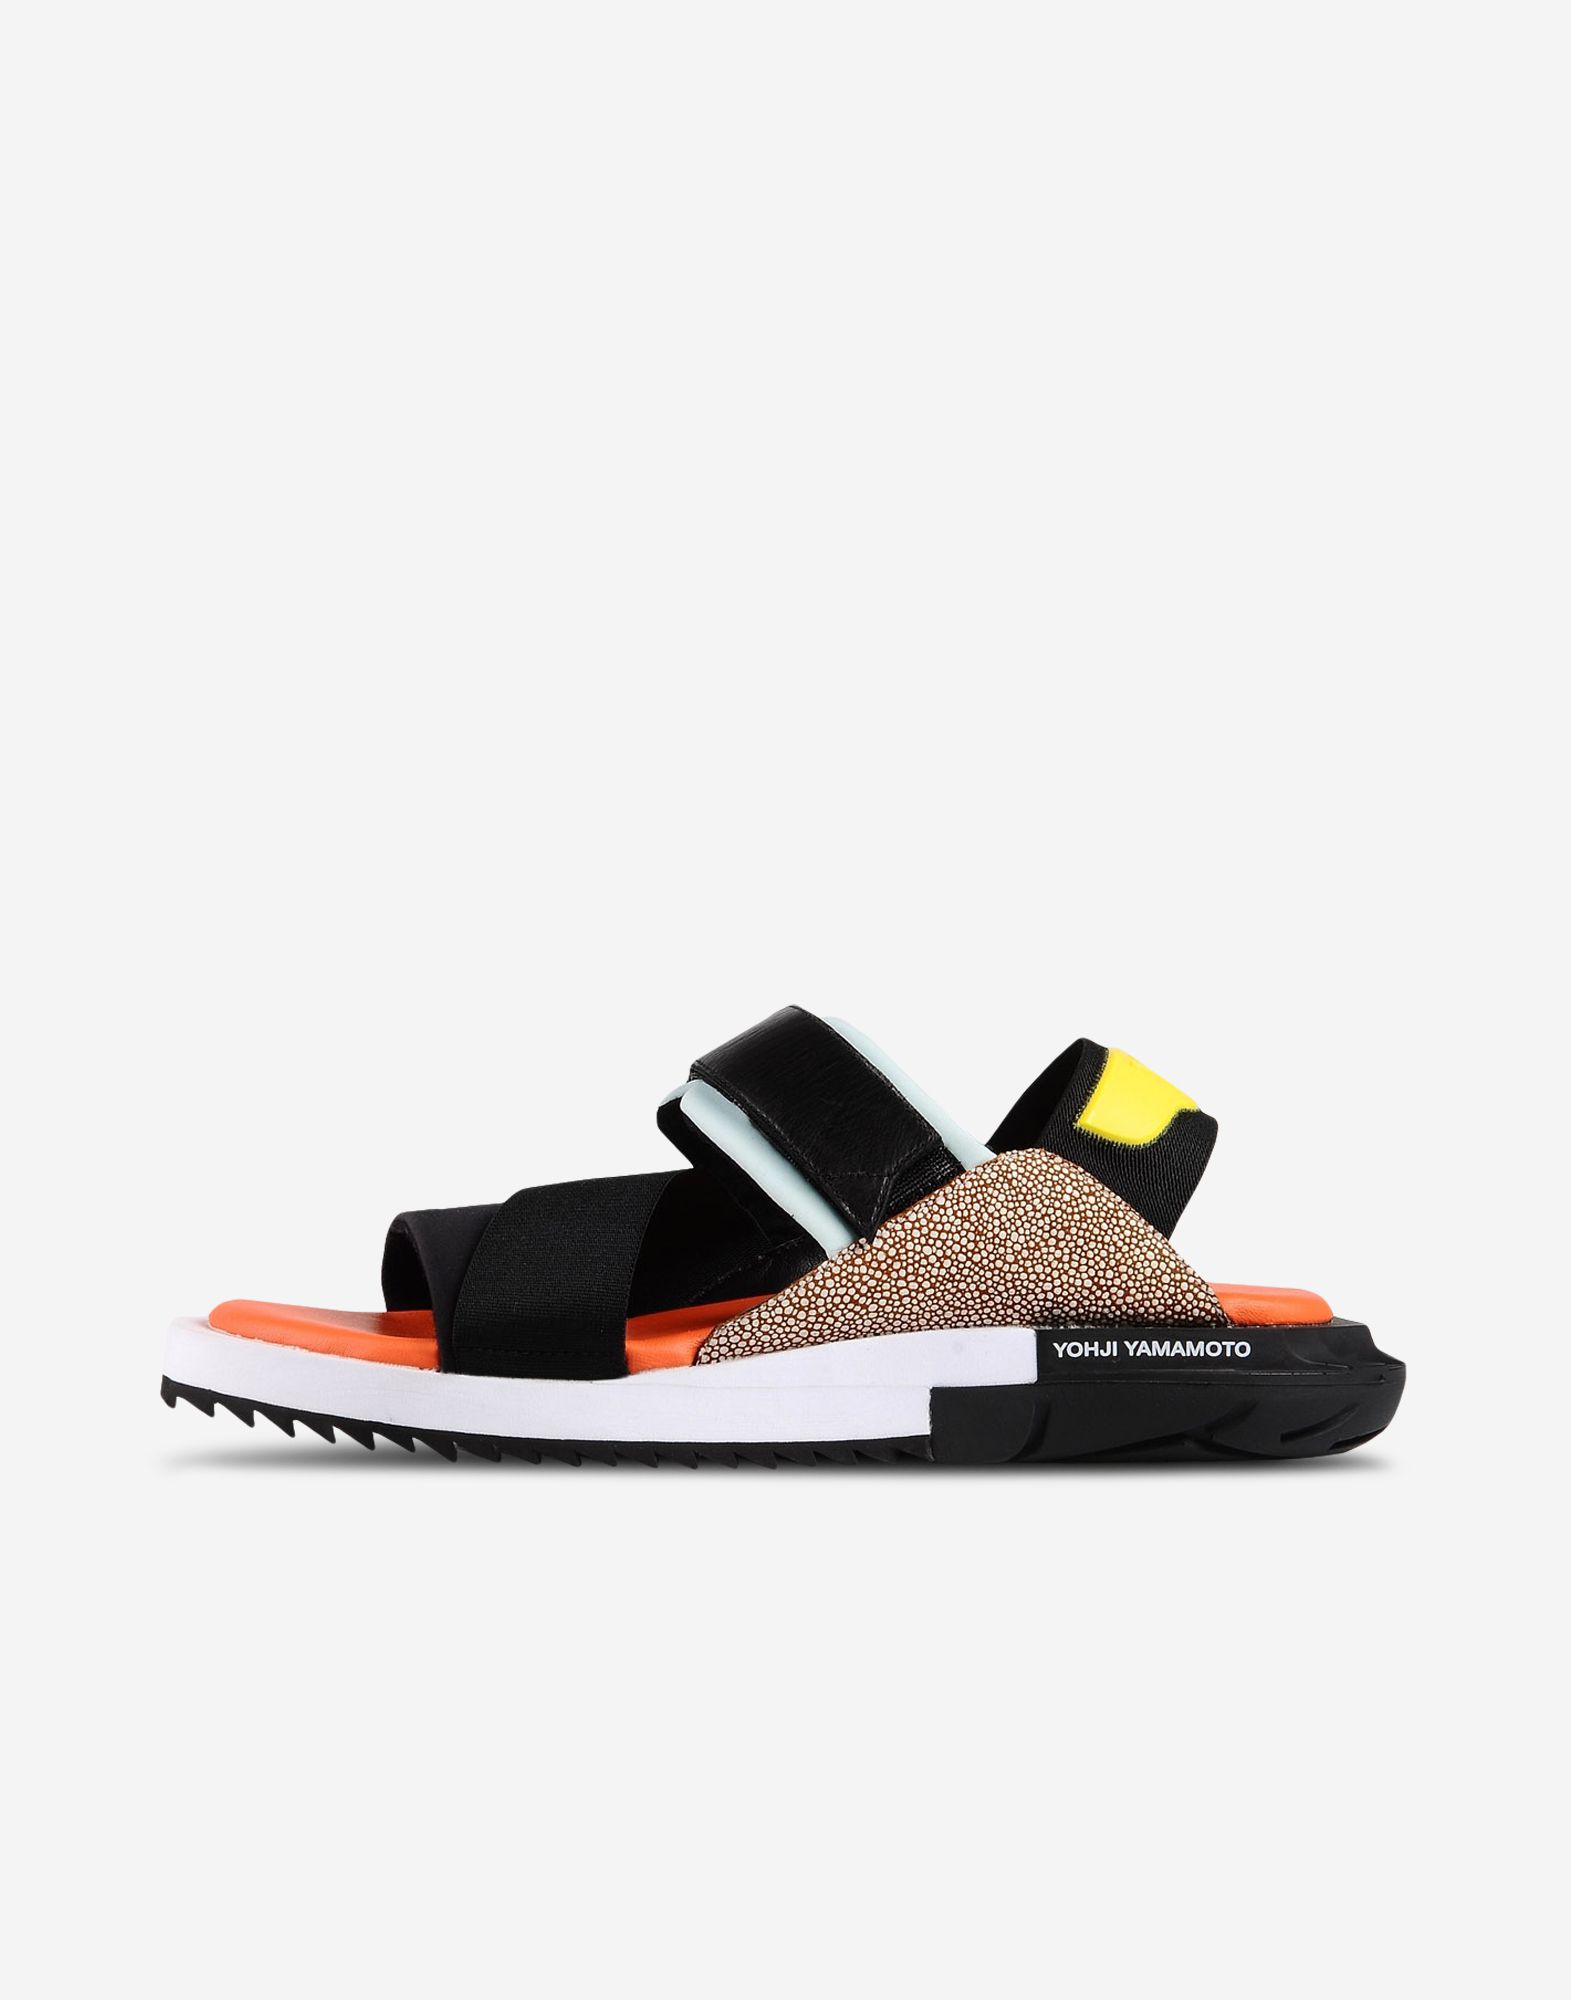 adidas sandals for mens online